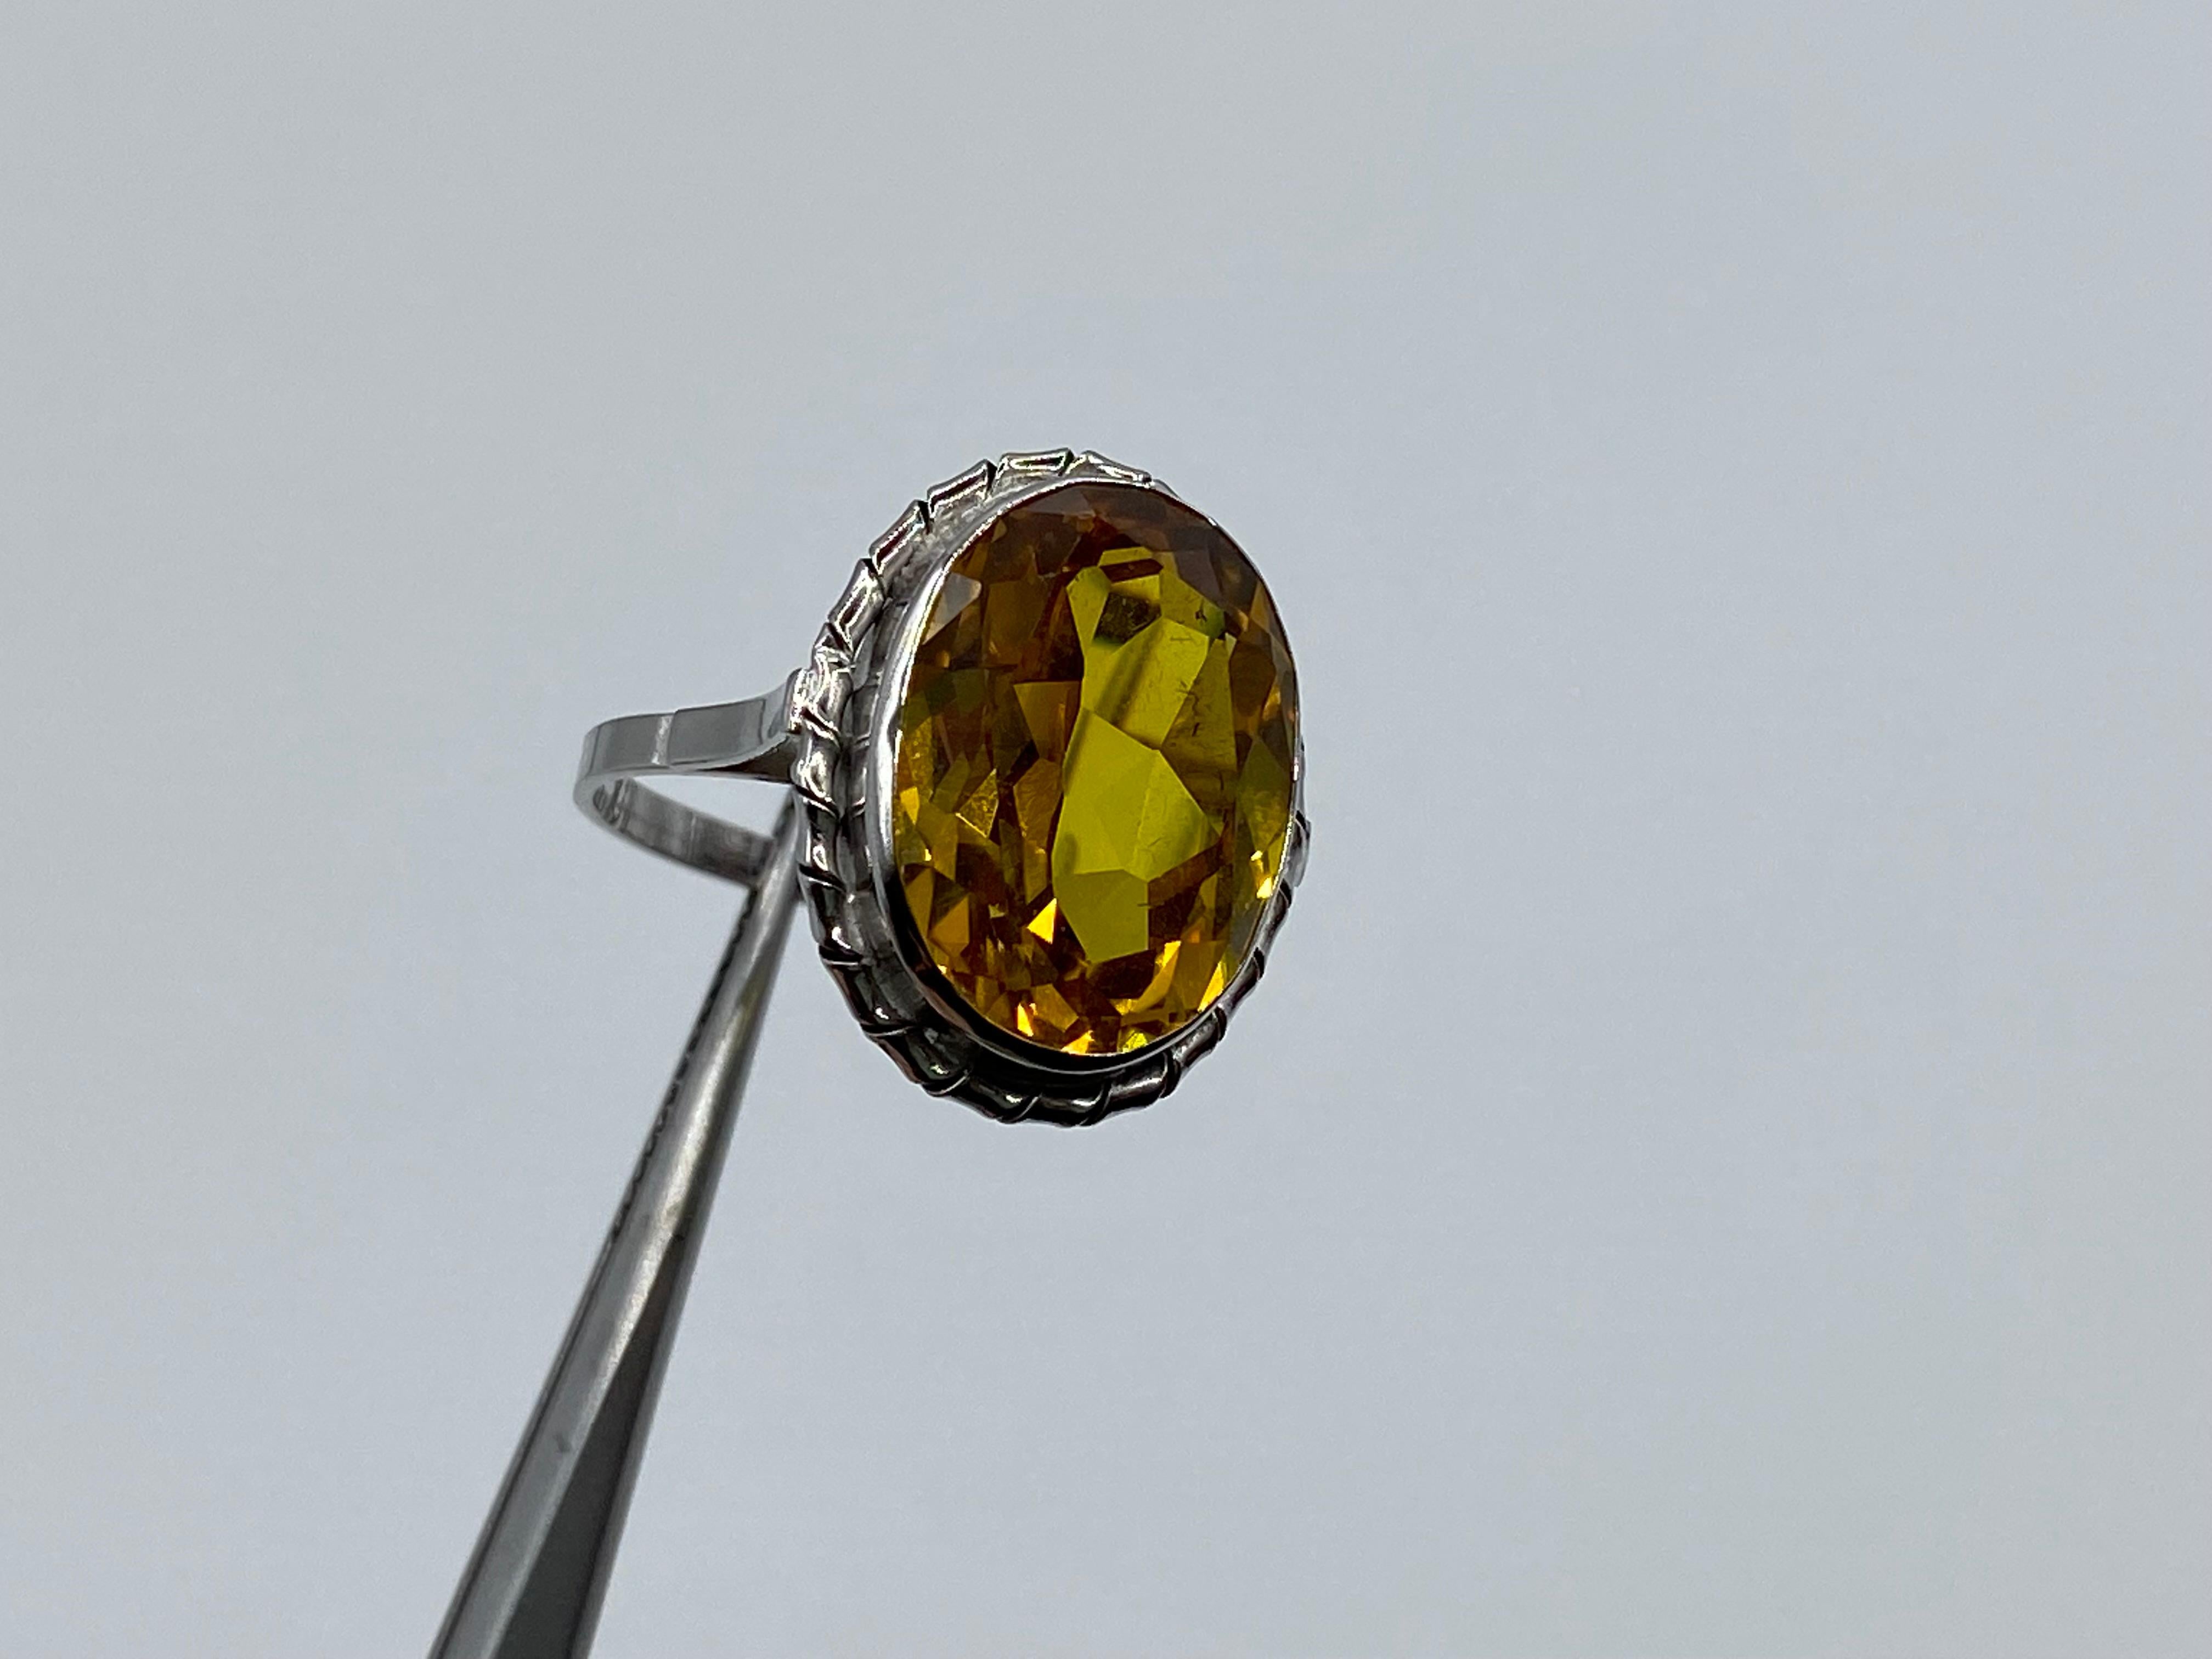 Vintage ring in 18 kt white gold and Yellow Topaz.
It dates back to the 1980s.
It weighs 4.8 grams and measures 14 (on request, without extra charge, I can have a trusted craftsman modified) The stone measures 16 mm by 11 mm.
Shipped in an elegant